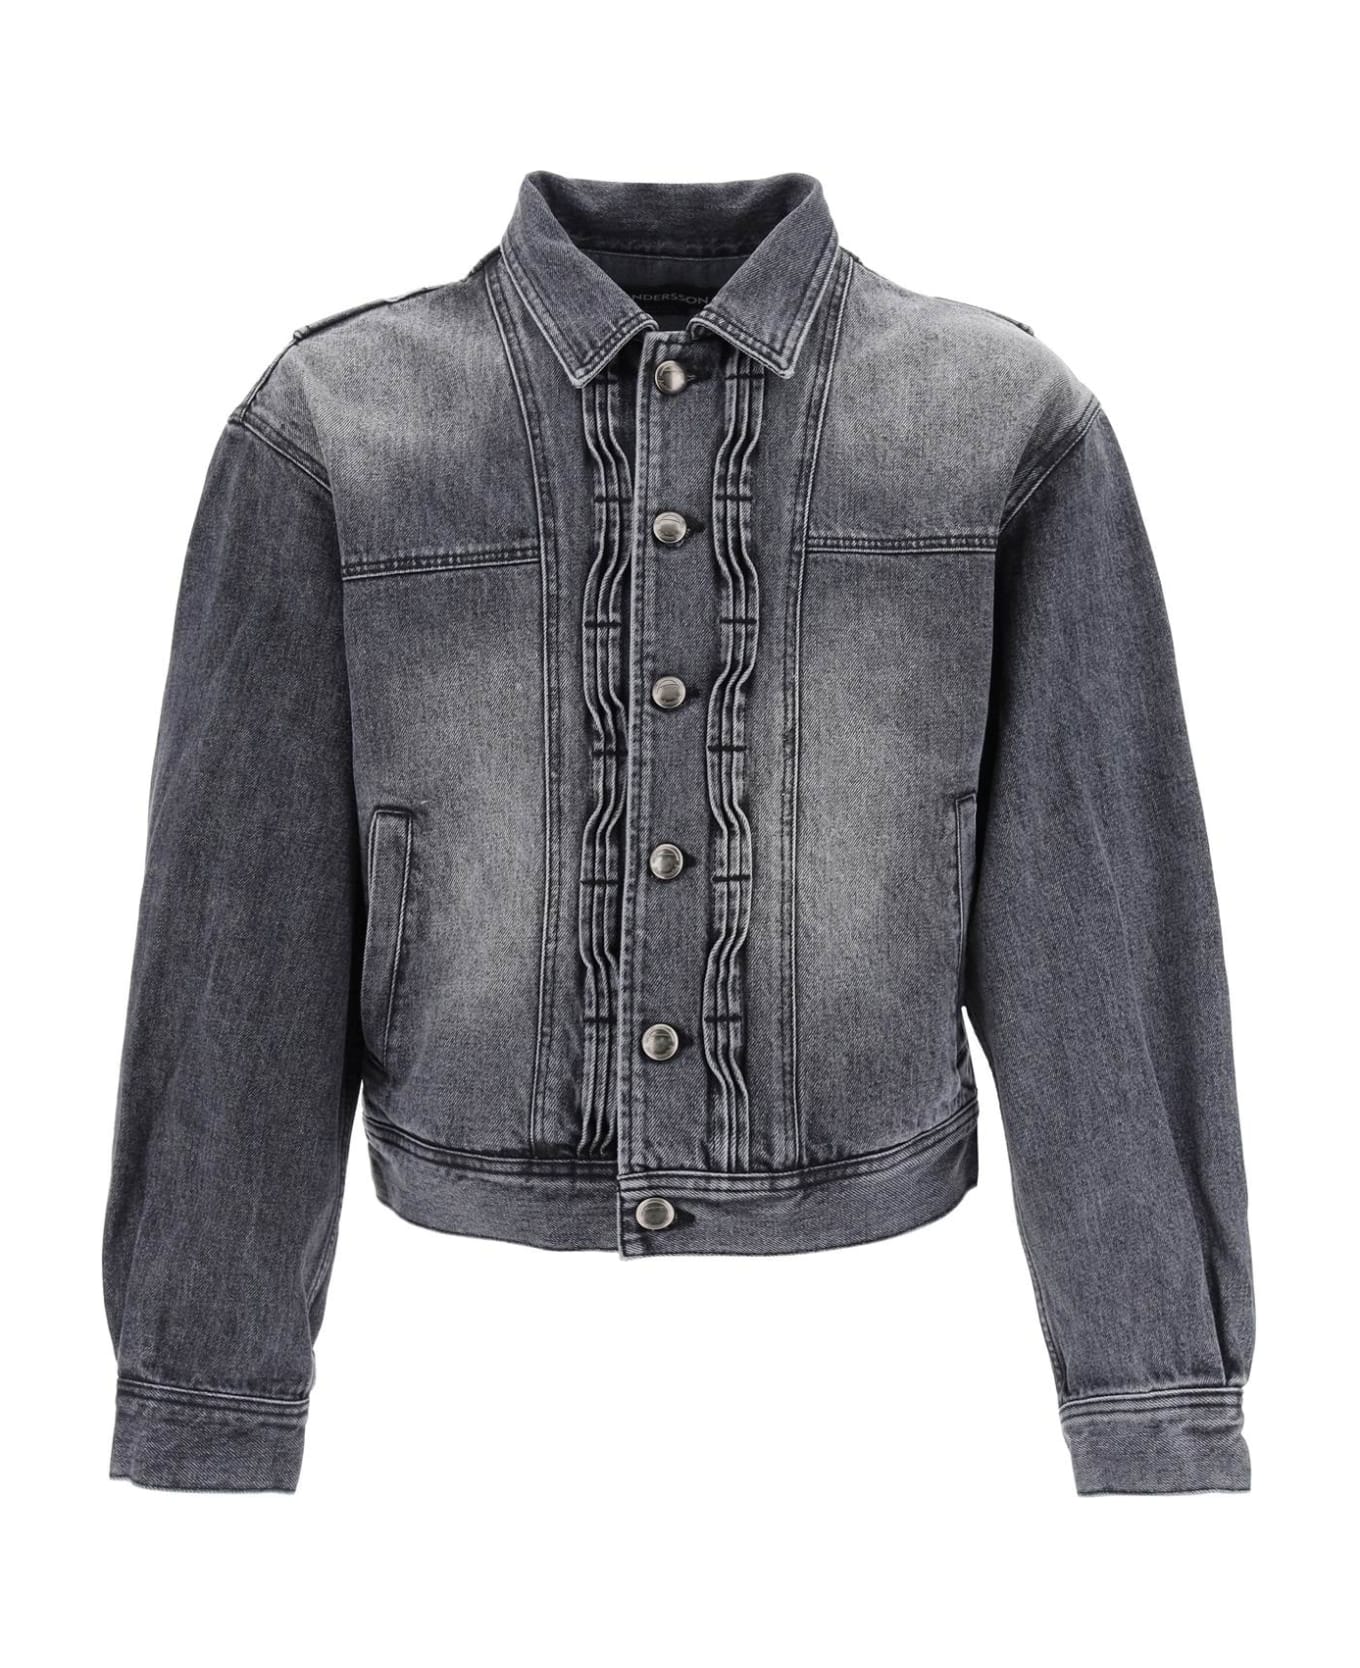 Andersson Bell Denim Jacket With Wavy Details - WASHED BLACK (Grey)